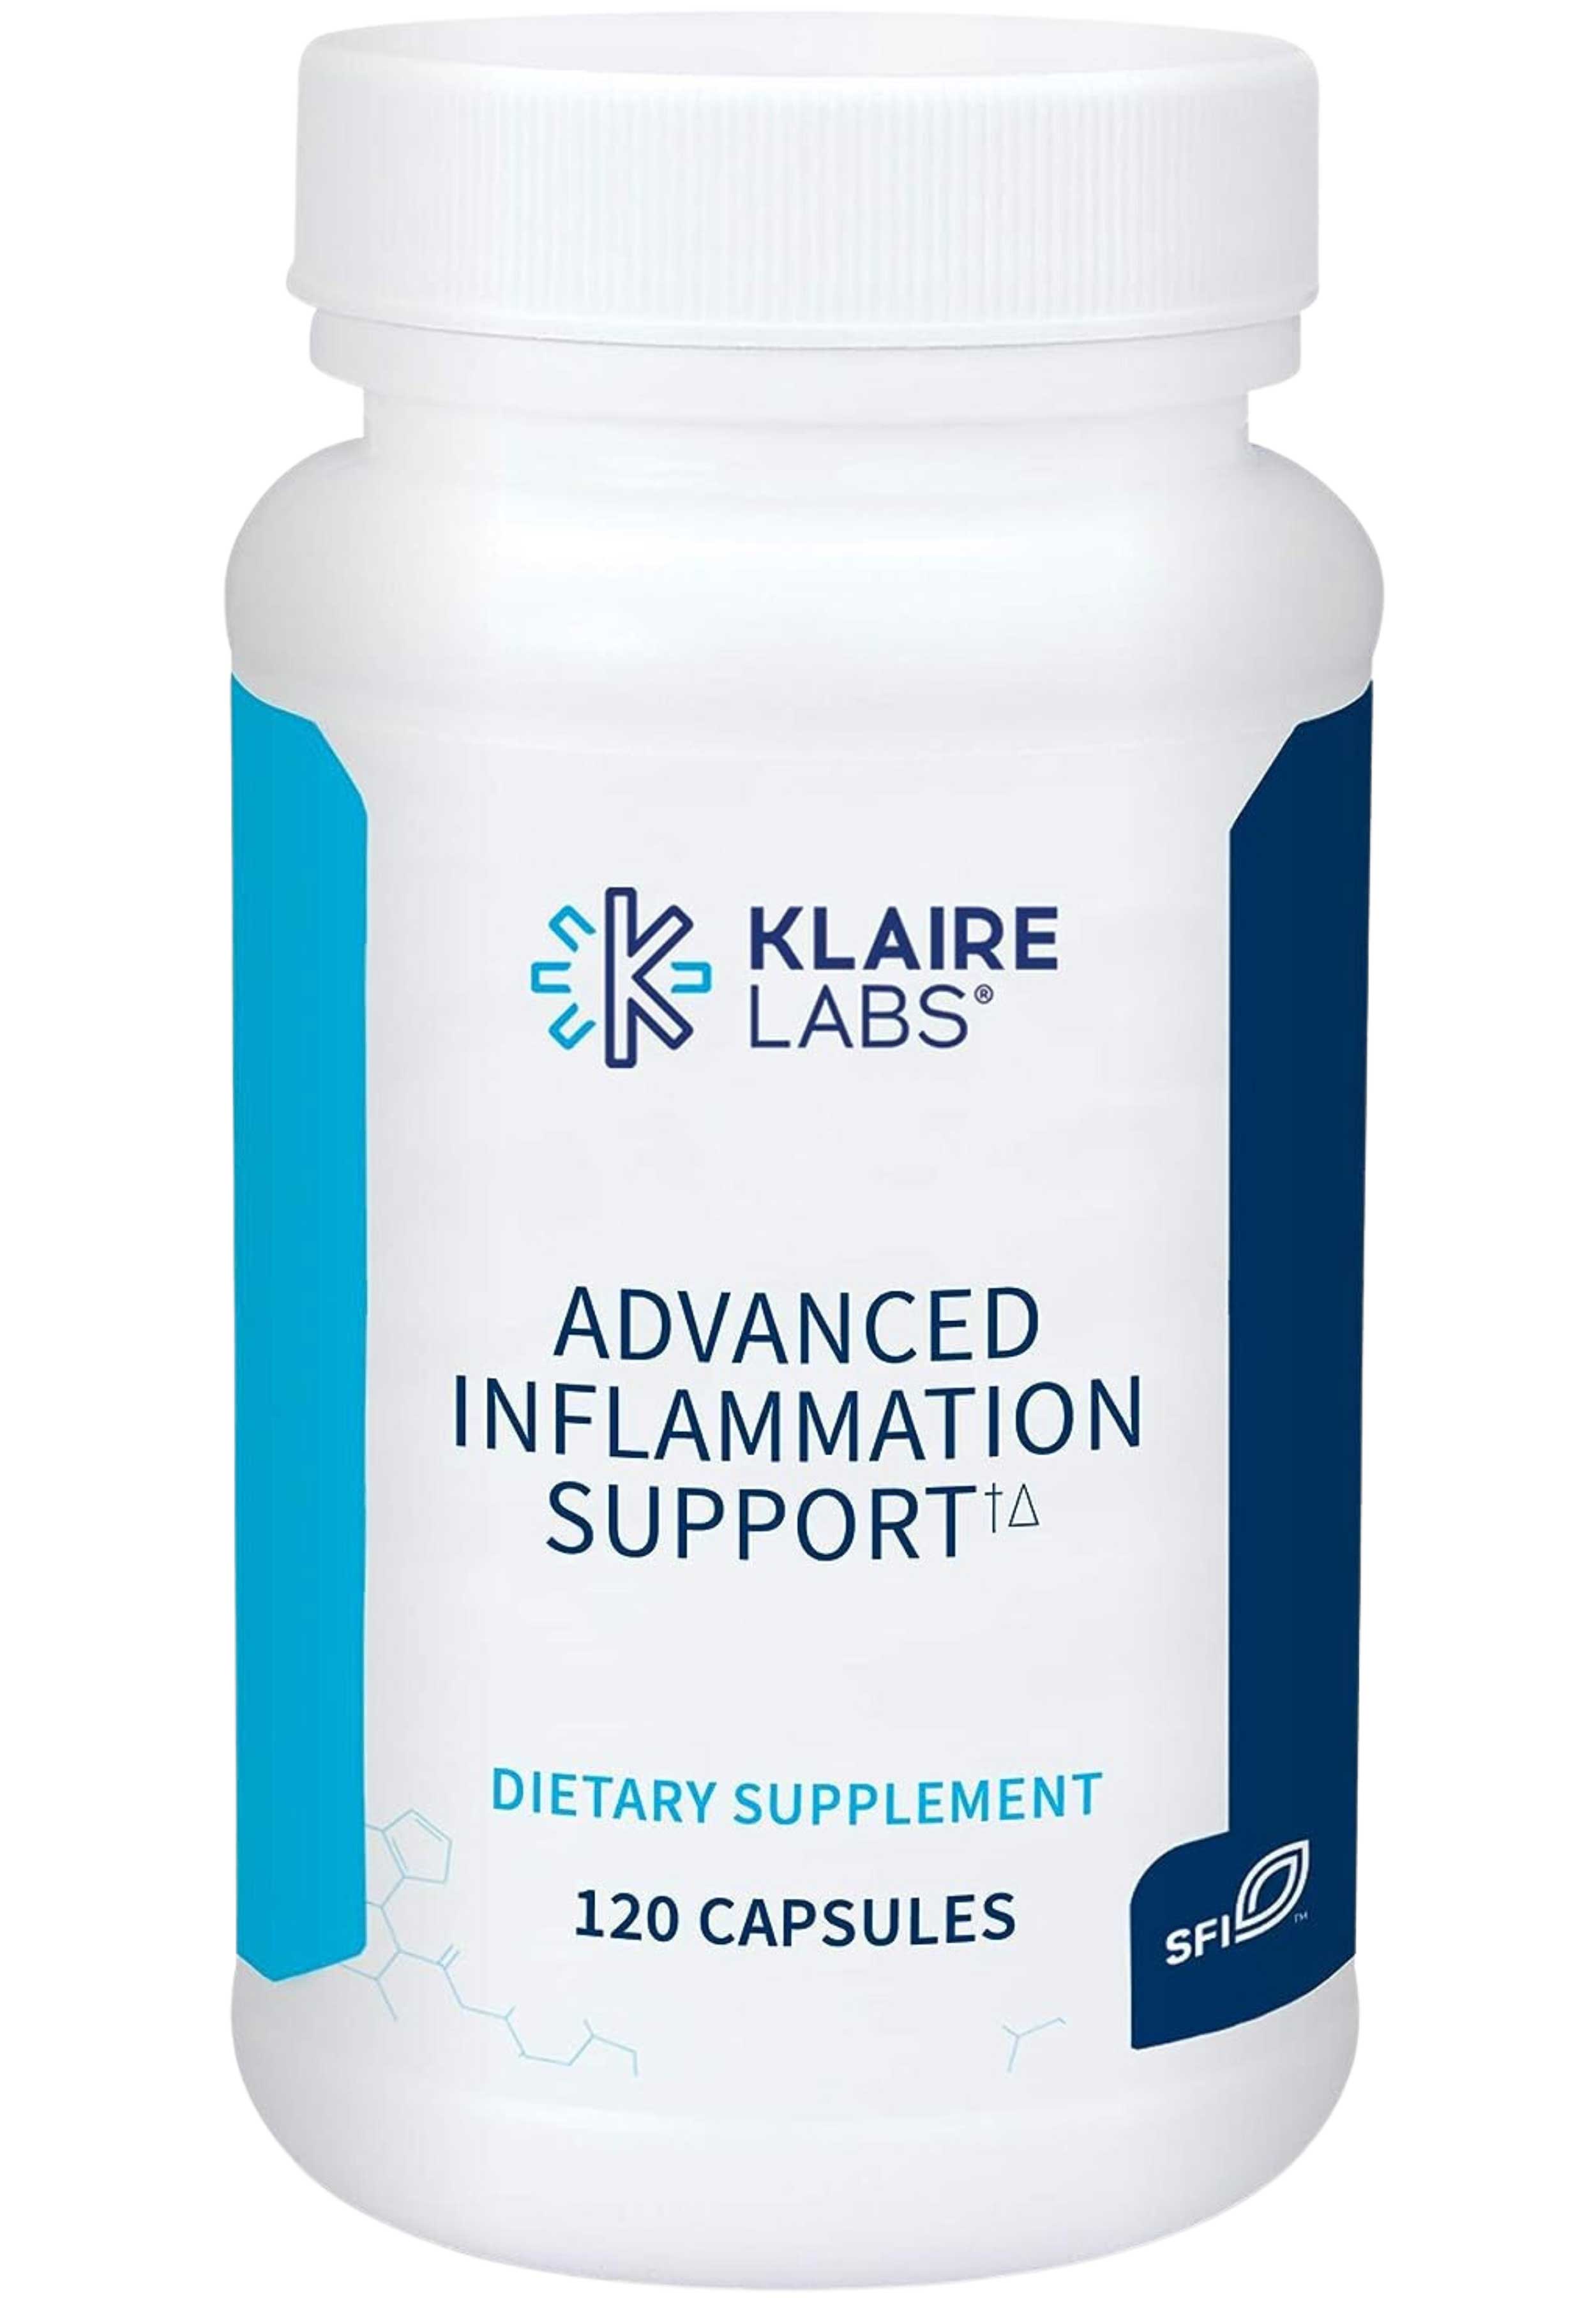 Klaire Labs Advanced Inflammation Support